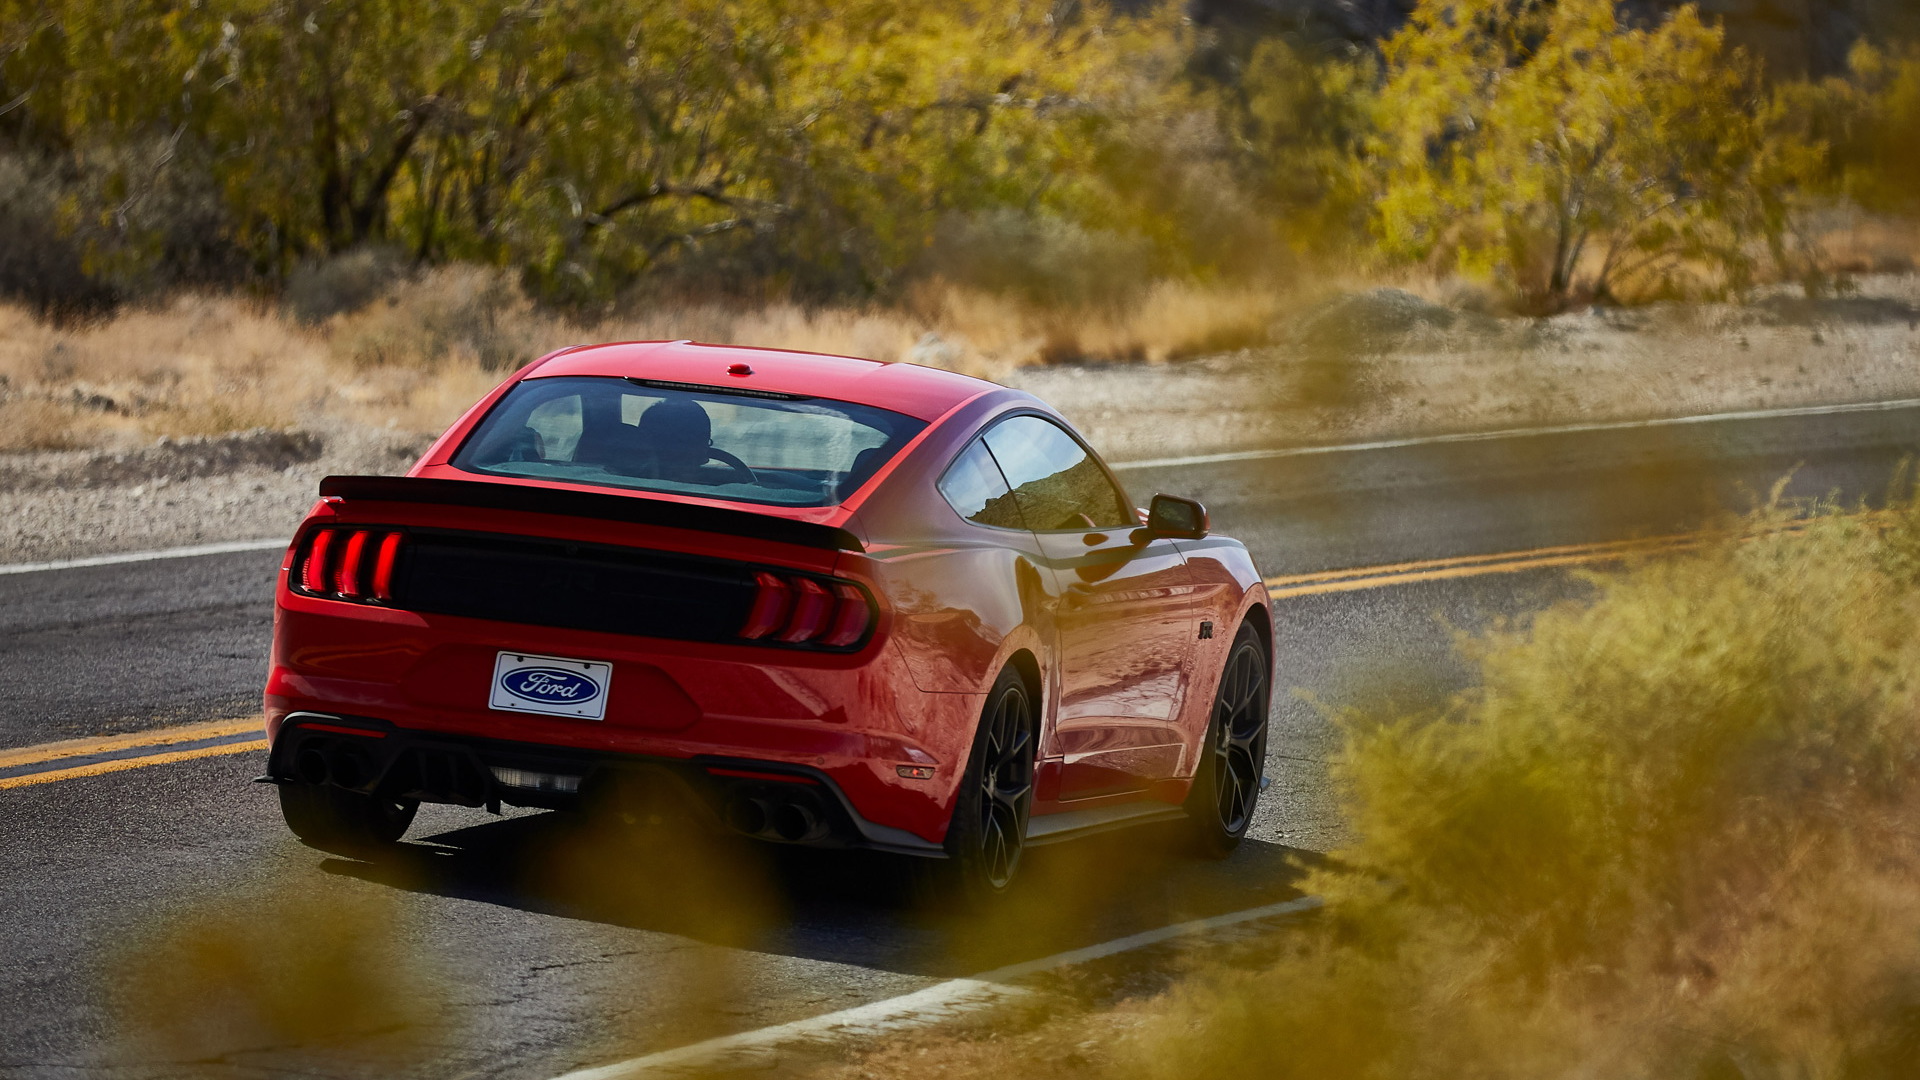 2019 Series 1 Mustang RTR Powered by Ford Performance